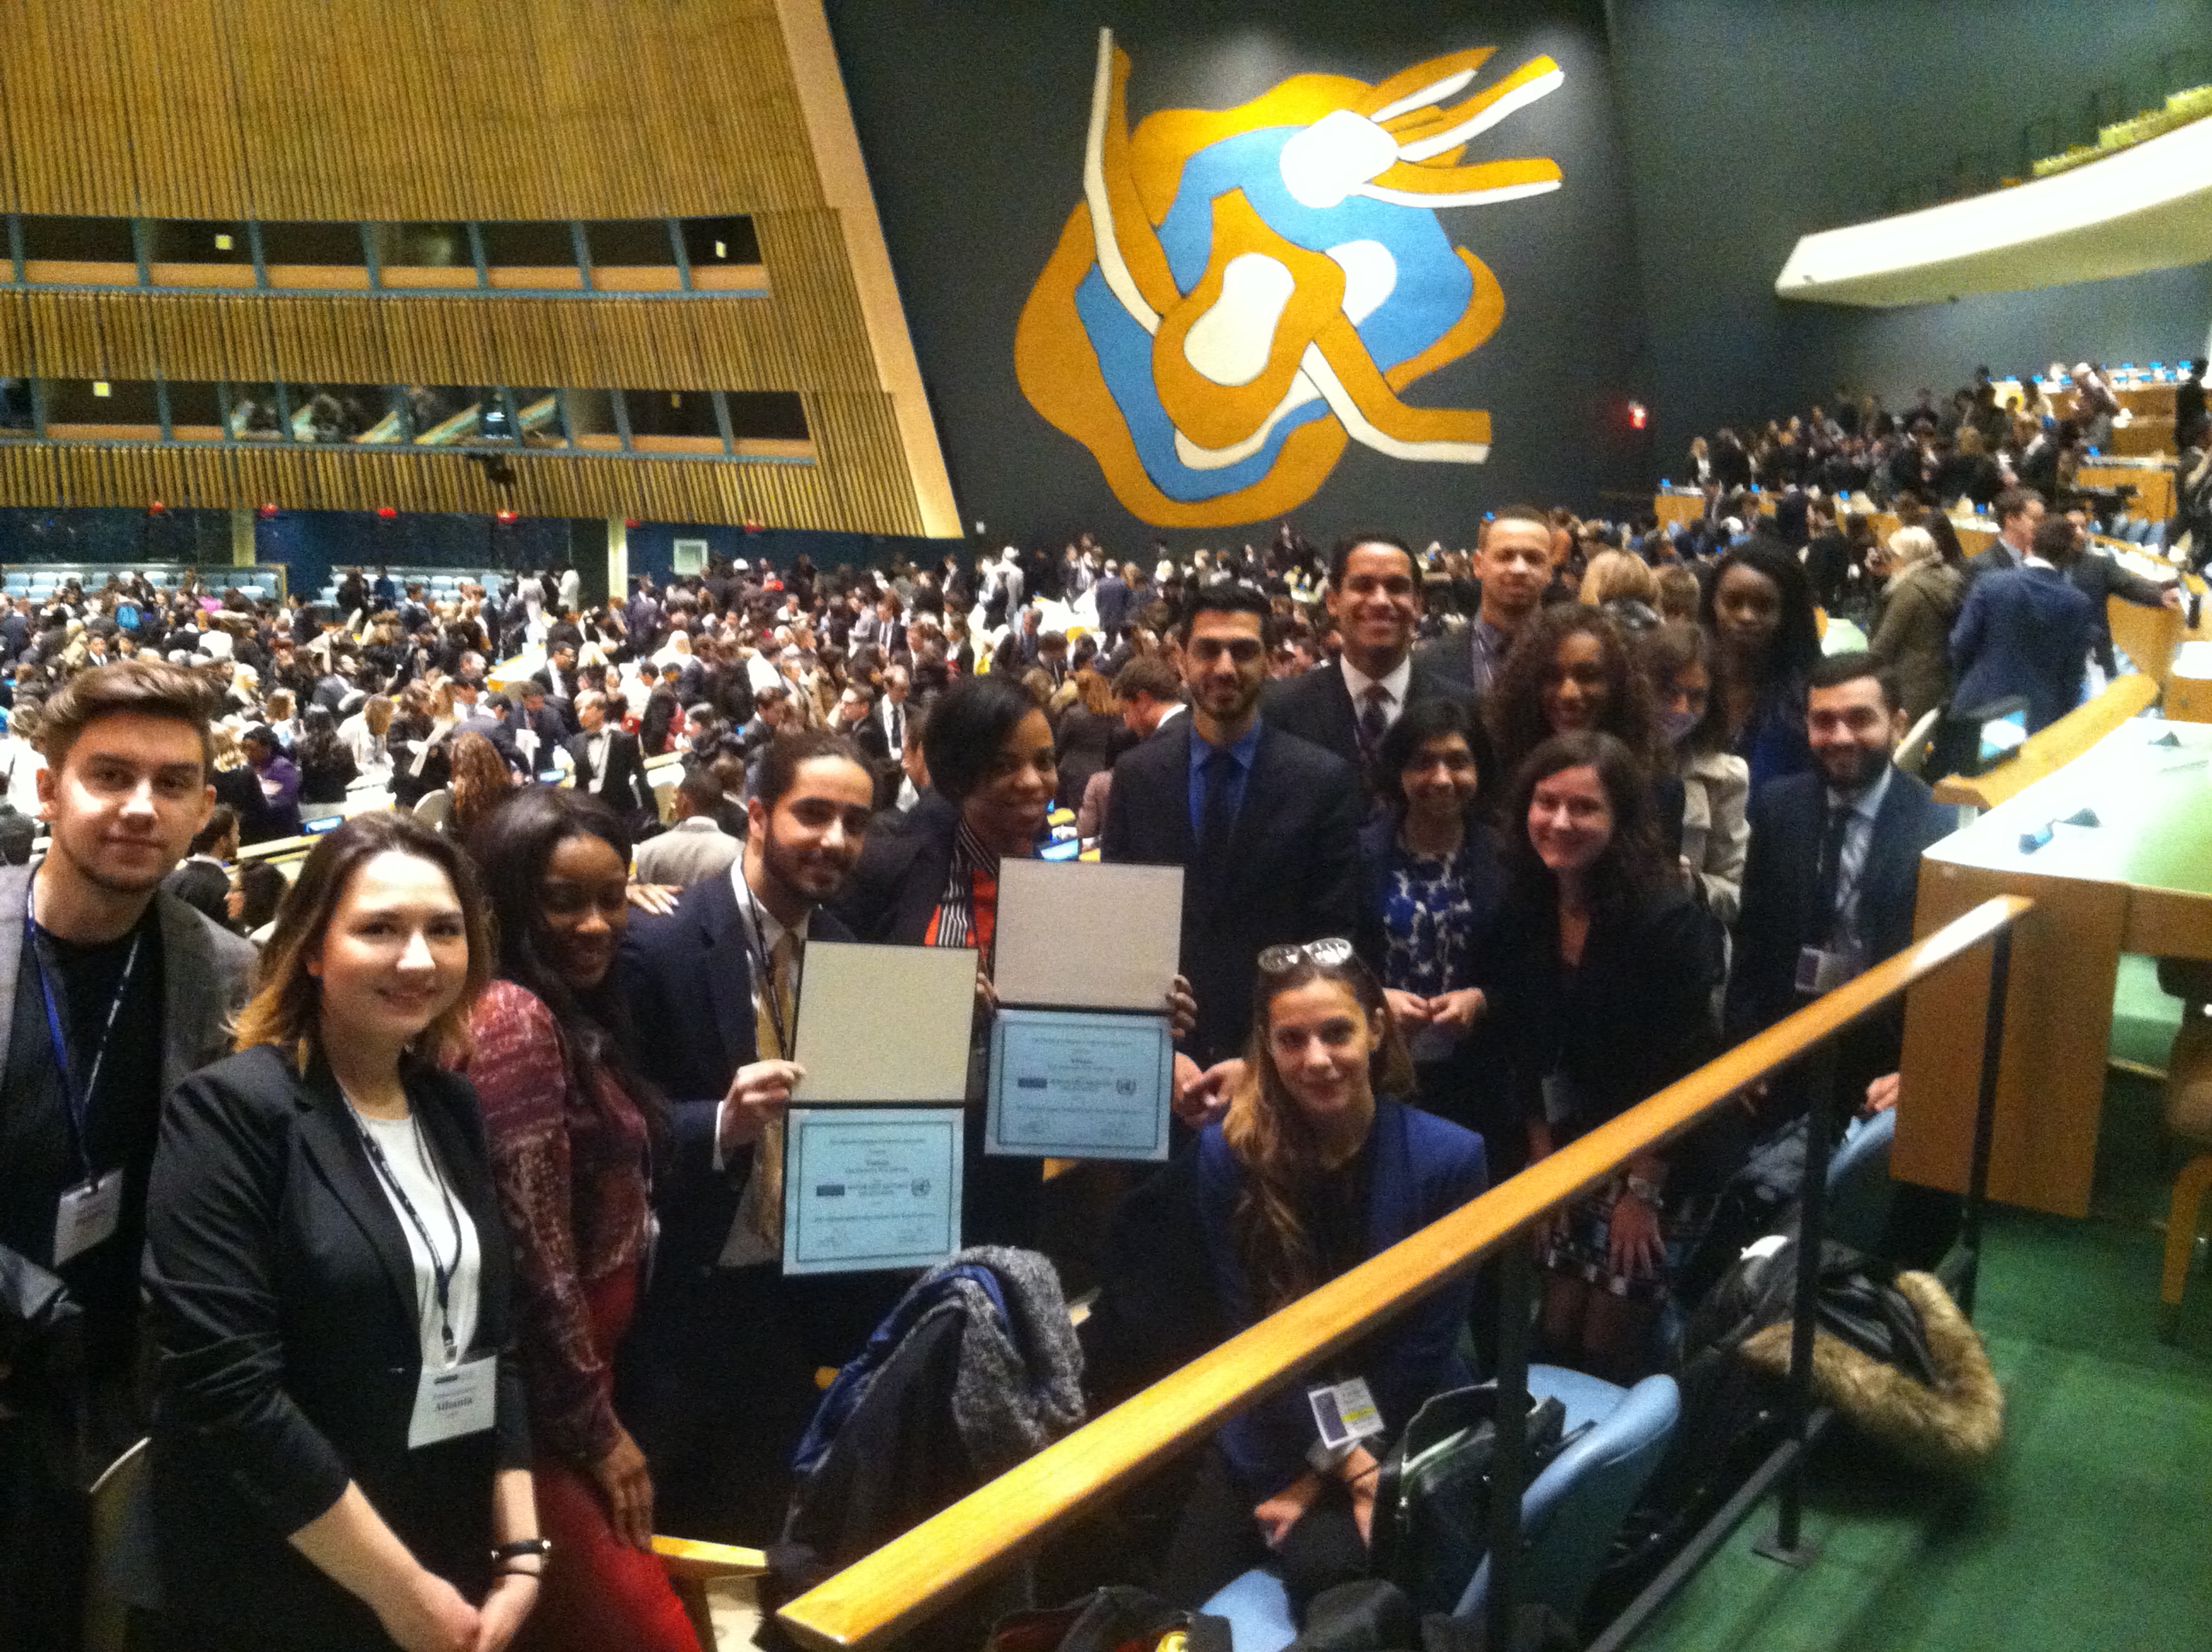 The Pace NYC Model United Nations students in the UN General Assembly Room after the Closing Ceremony of the 2015 National Model UN conference in New York City.